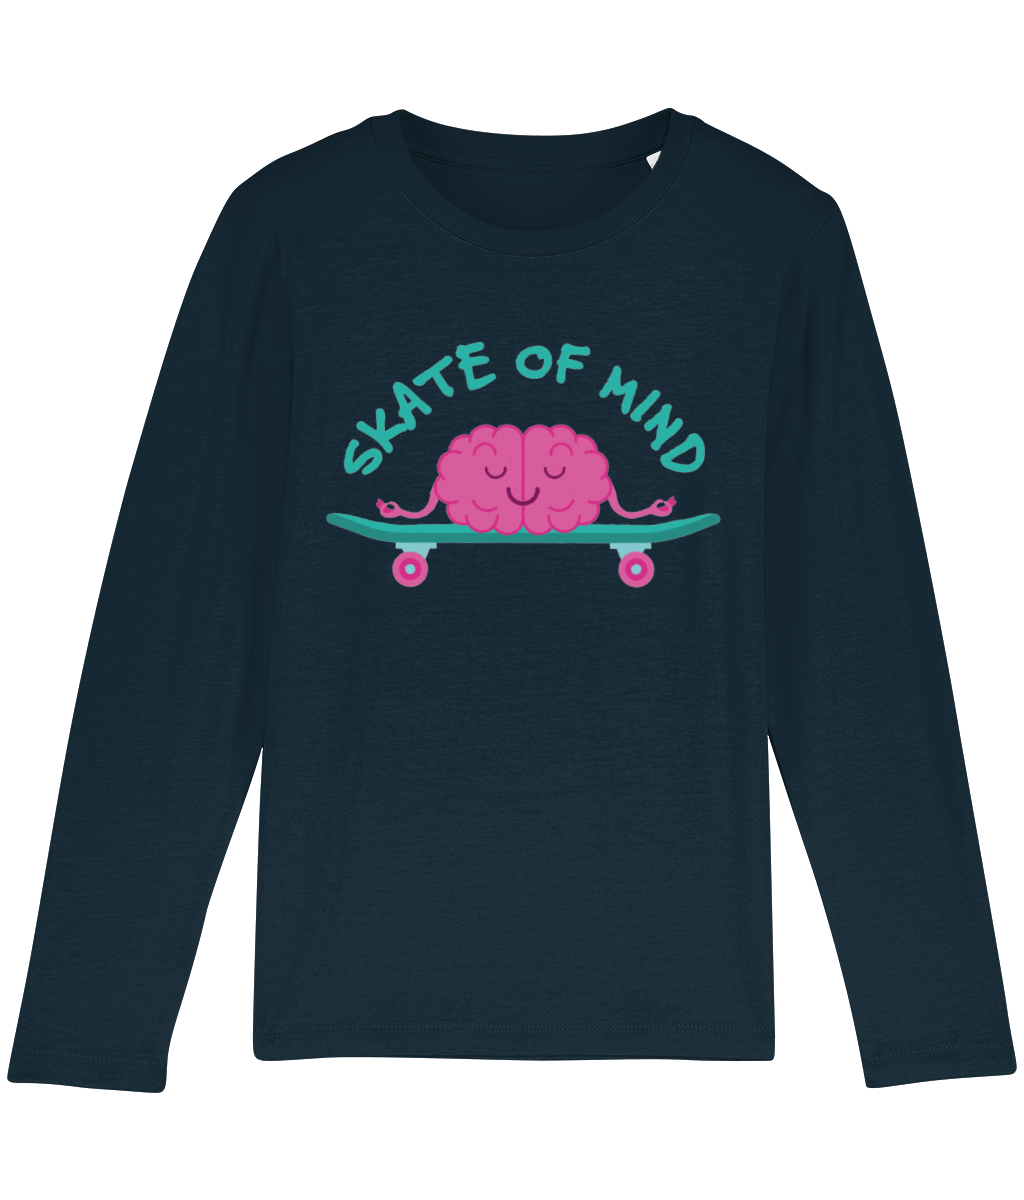 Long Sleeve T Shirt, 100% Organic Soft Cotton, it's just a 'Skate Of Mind'